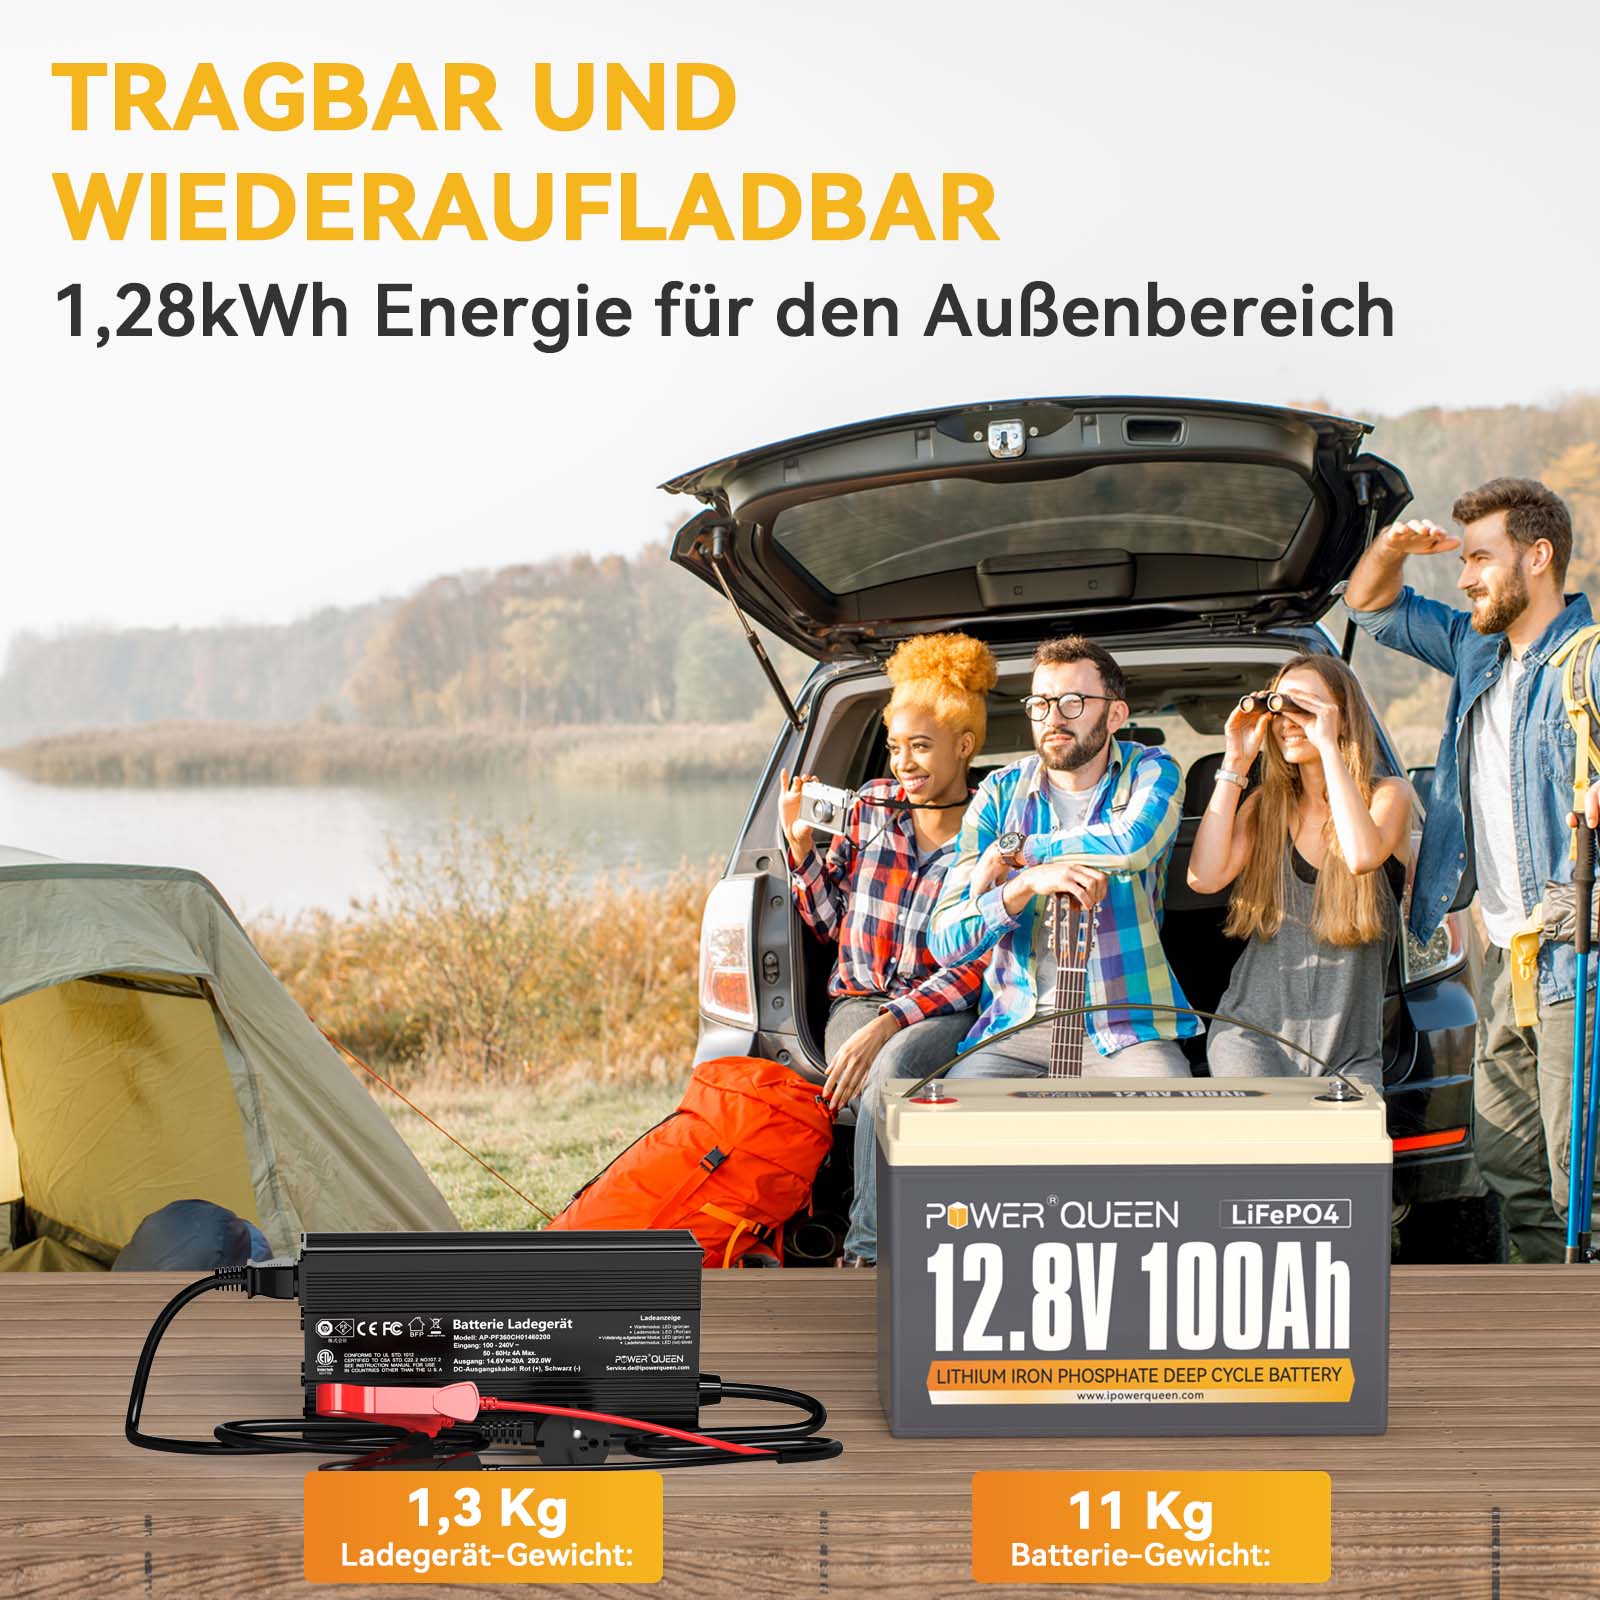 Batterie Power Queen 12,8 V 100 Ah LiFePO4 avec chargeur 14,6 V 20 A LiFePO4